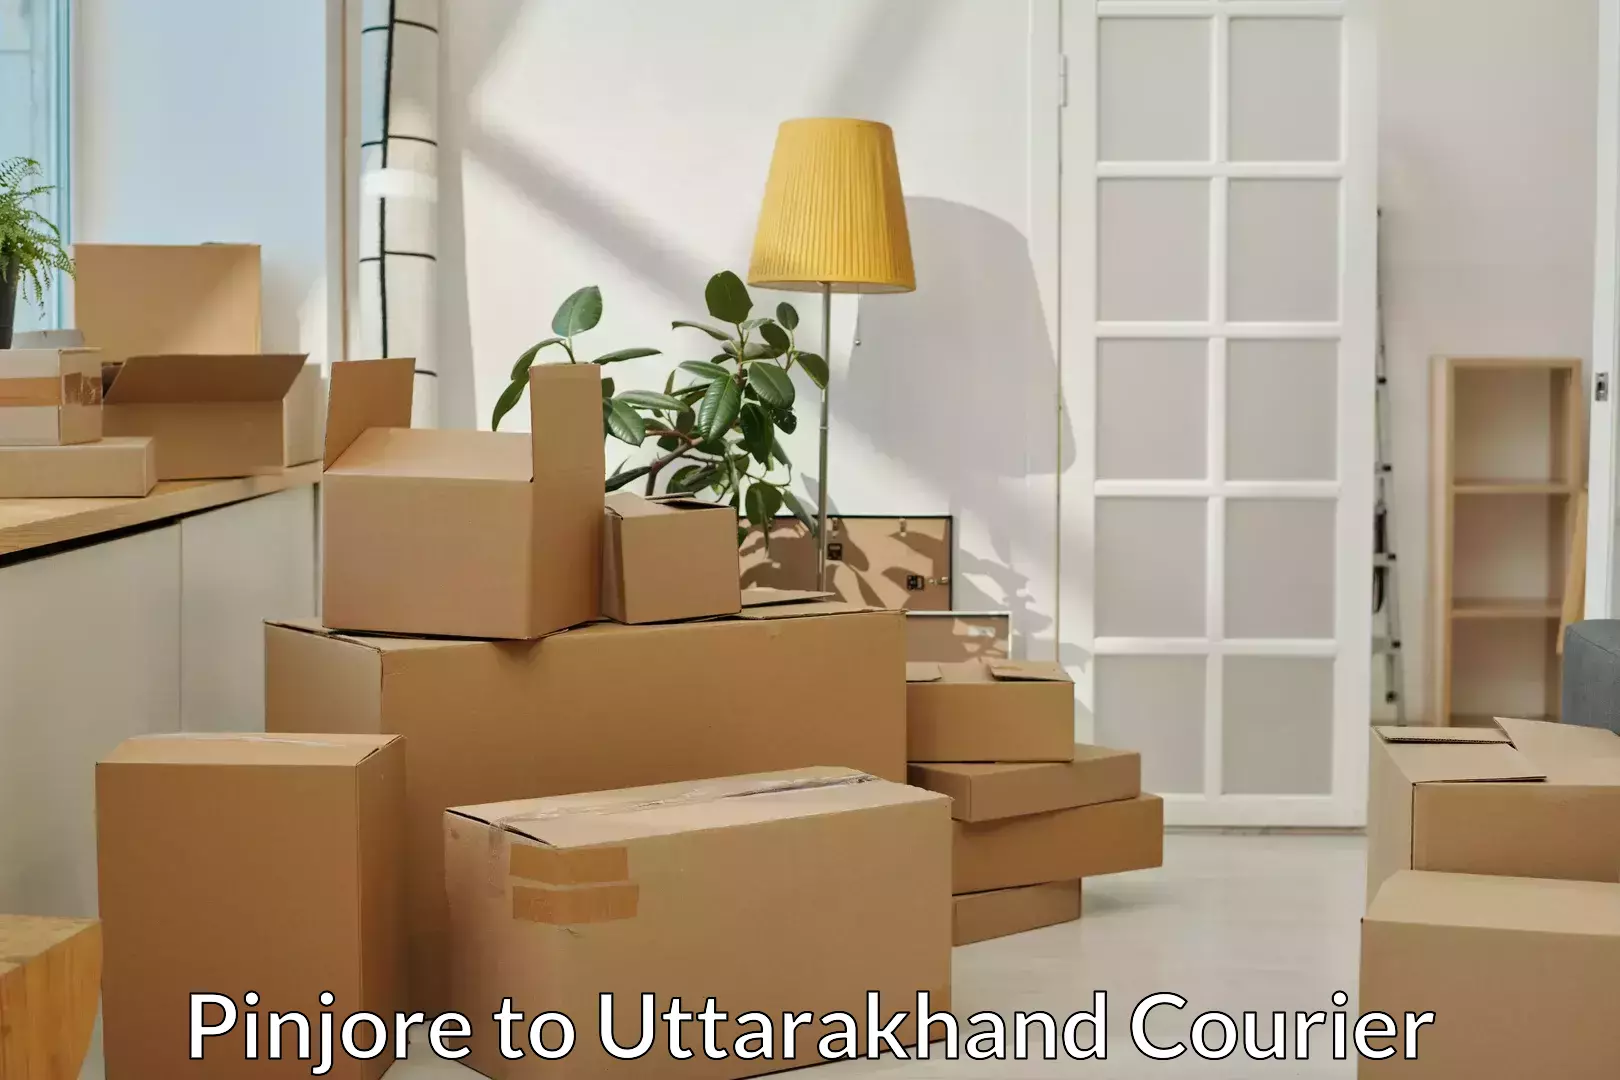 Household moving experts Pinjore to Haridwar